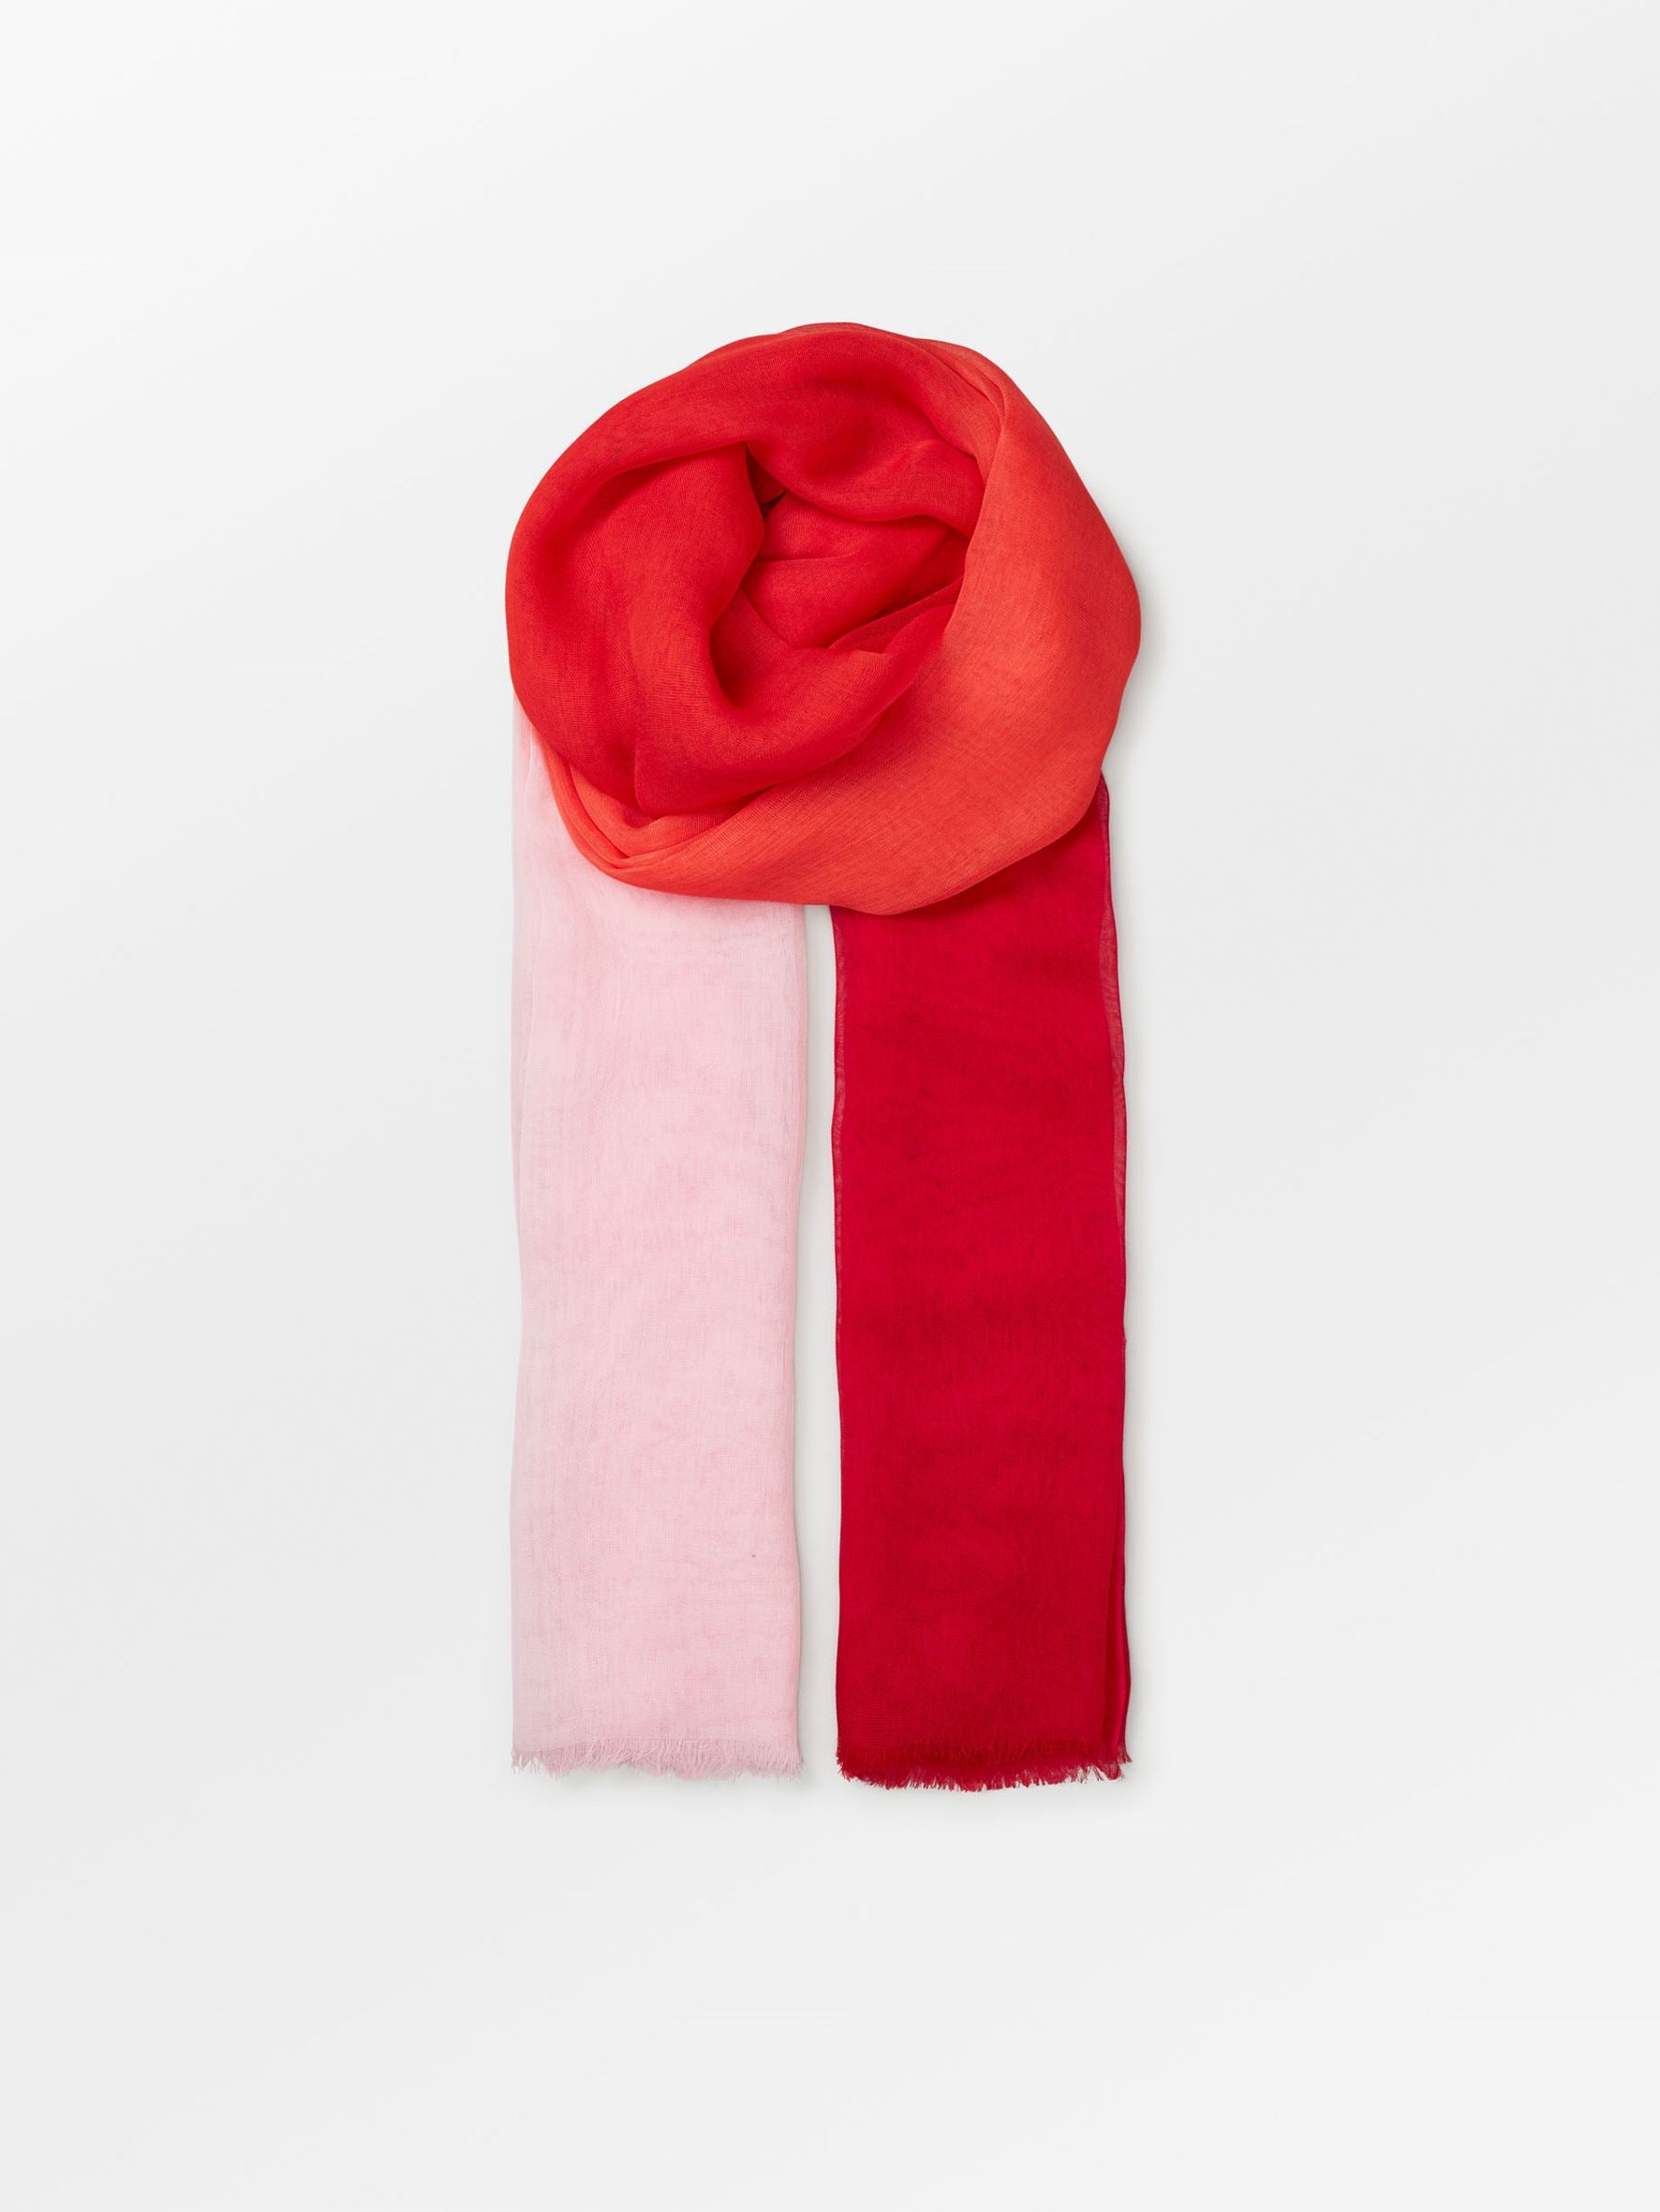 Becksöndergaard, Ombria Mowo Scarf - Red, archive, archive, sale, sale